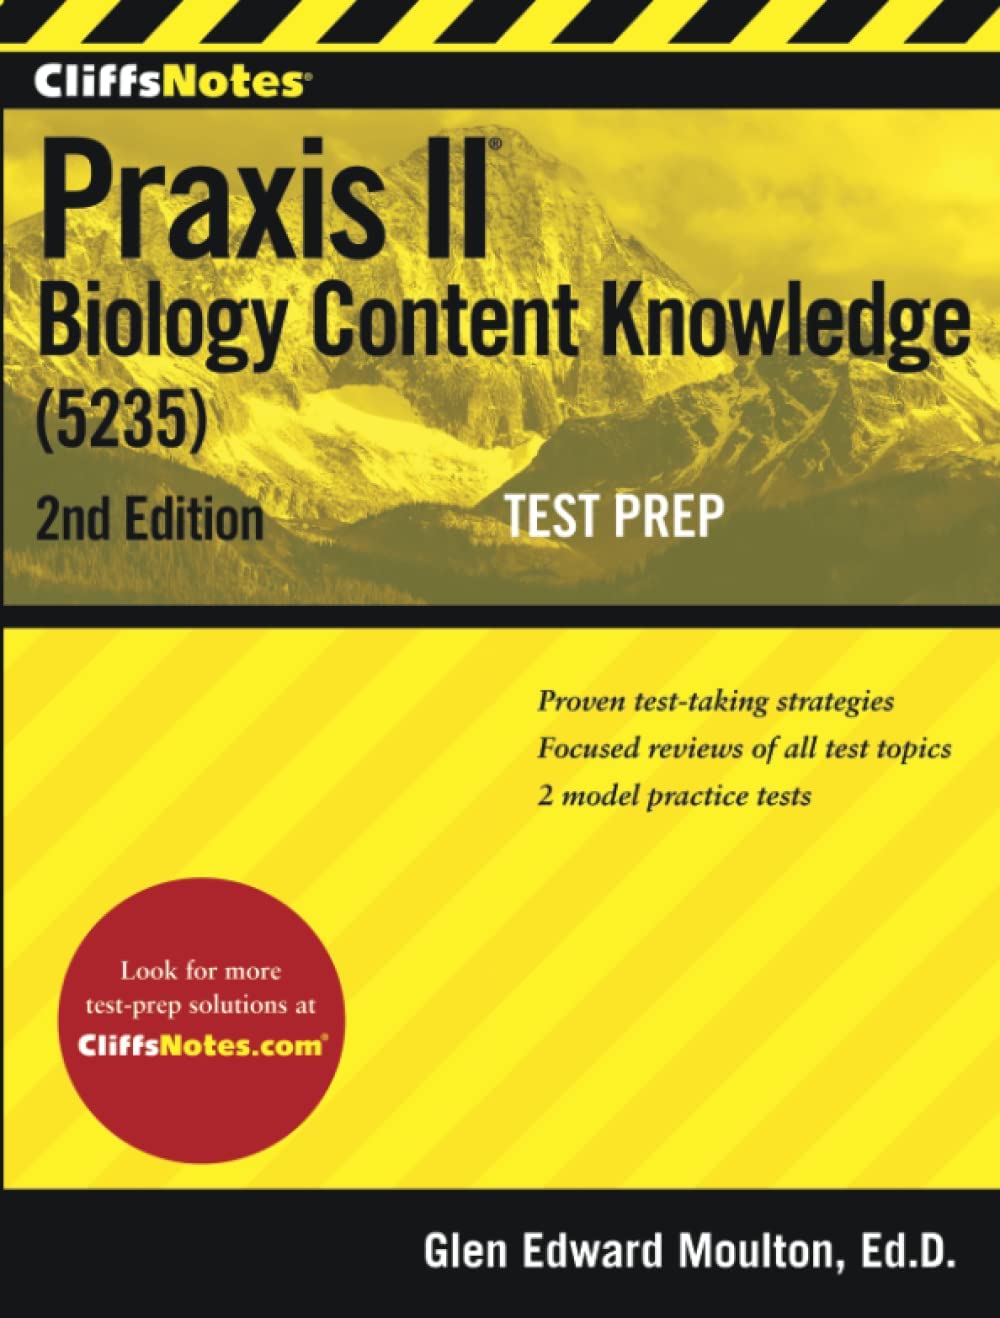 CliffsNotes Praxis II Biology Content Knowledge (5235), 2nd Edition (Cliffsnotes Test Prep)